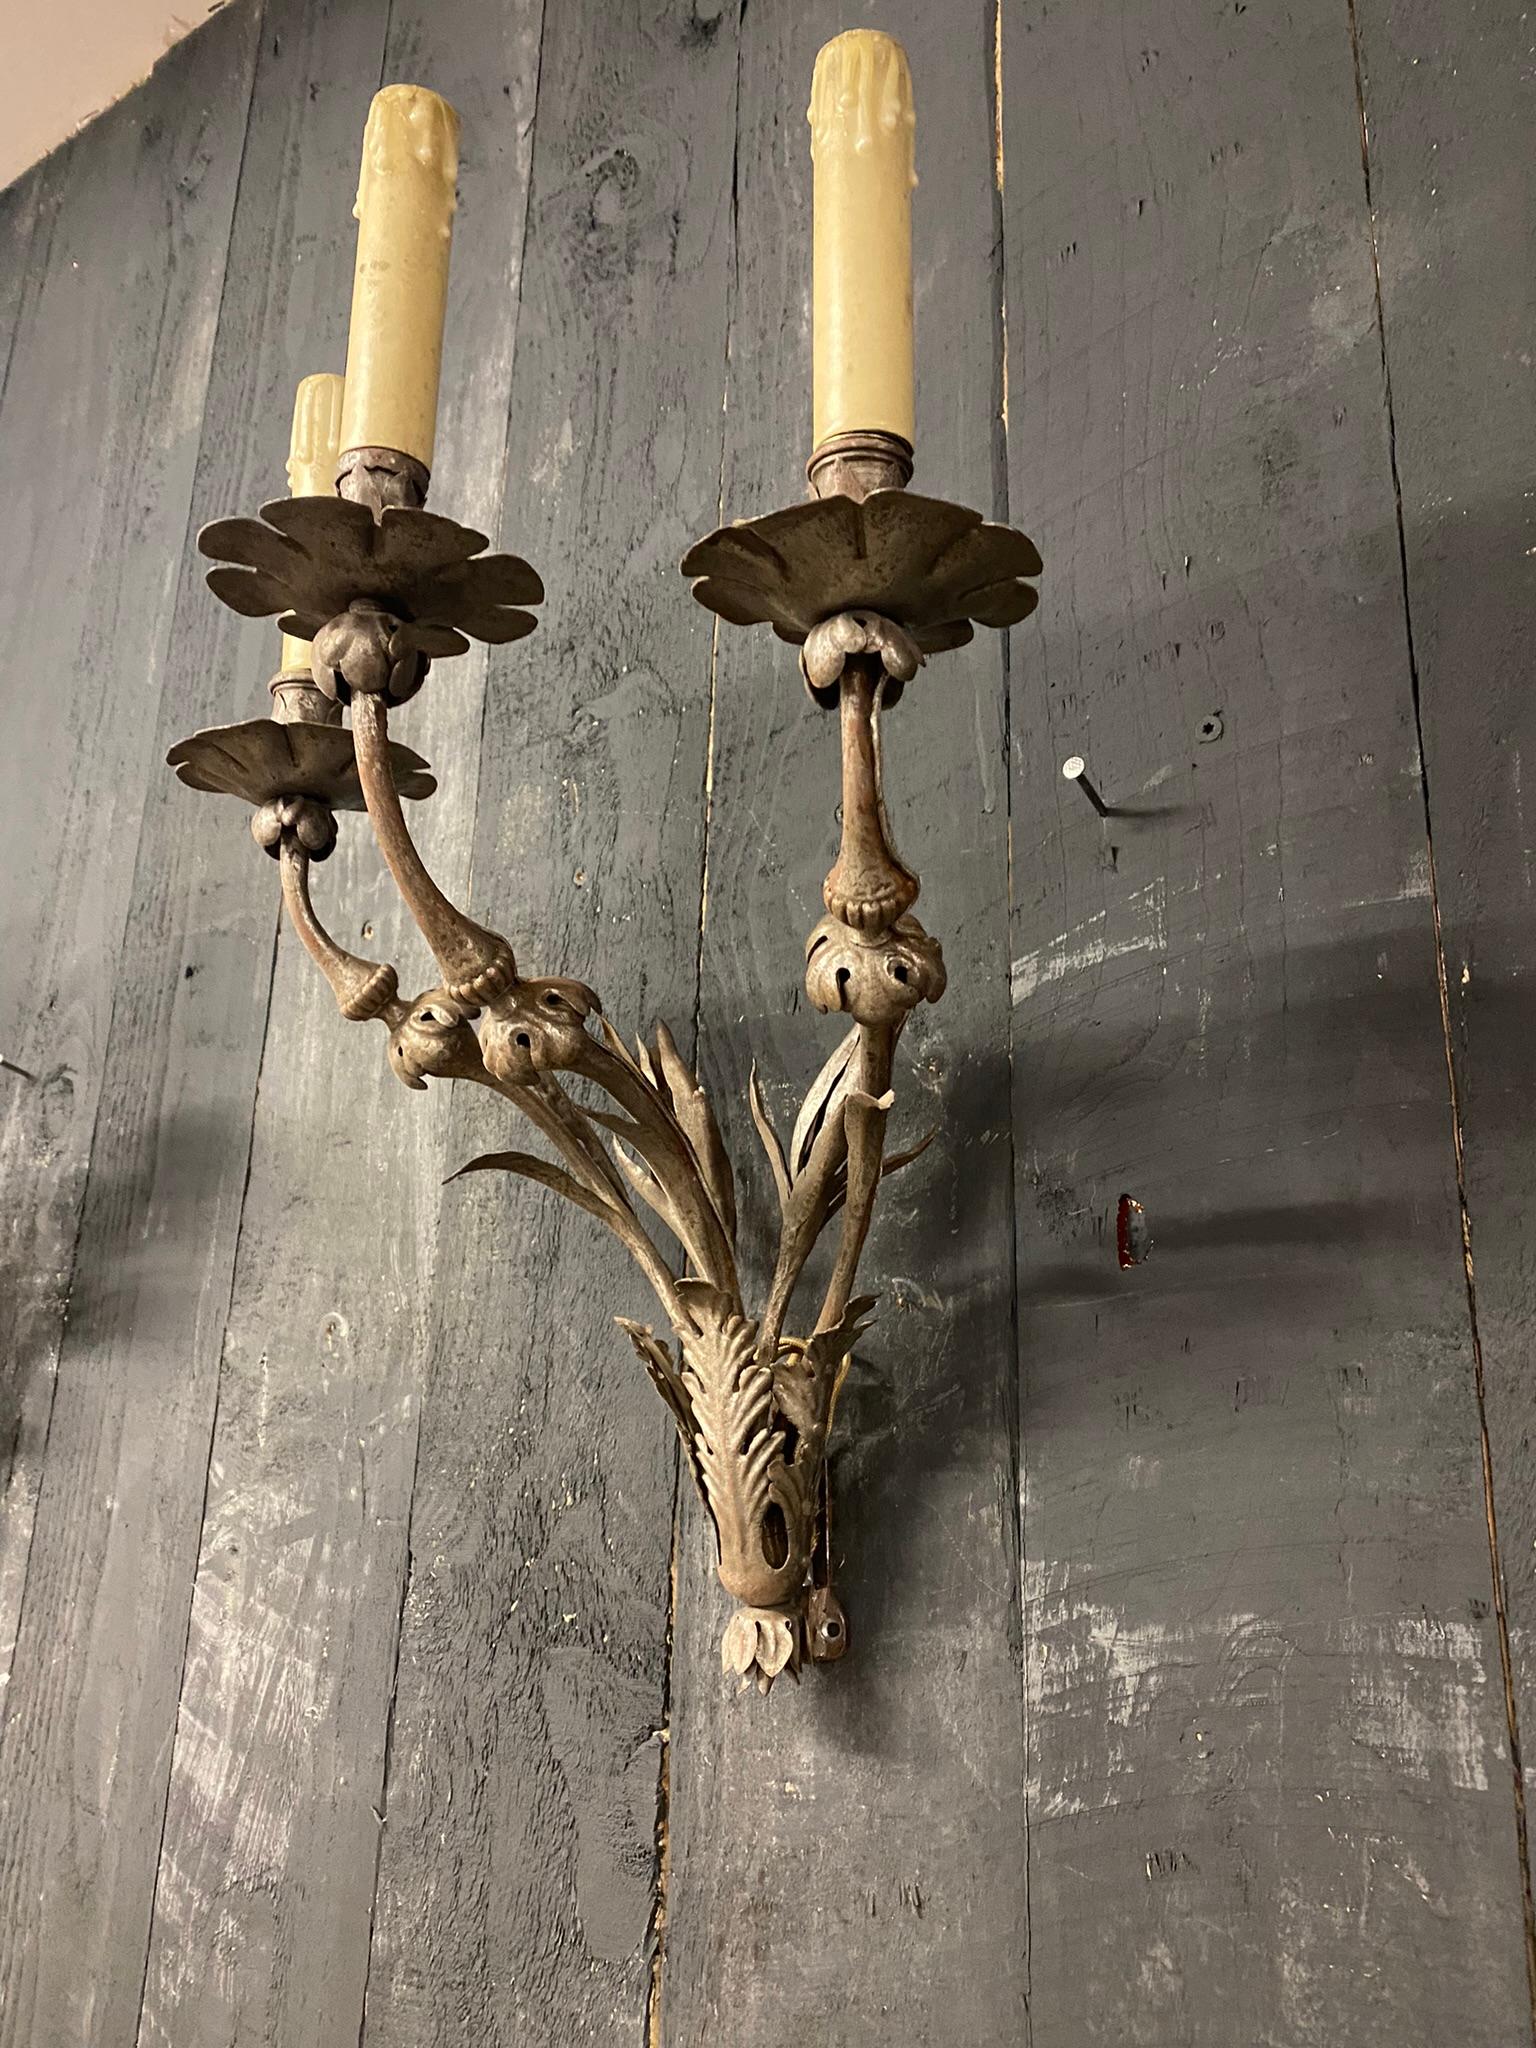 Mid-20th Century Elegant Wrought Iron Sconces from a Chateau in Central France, circa 1940/1950 For Sale